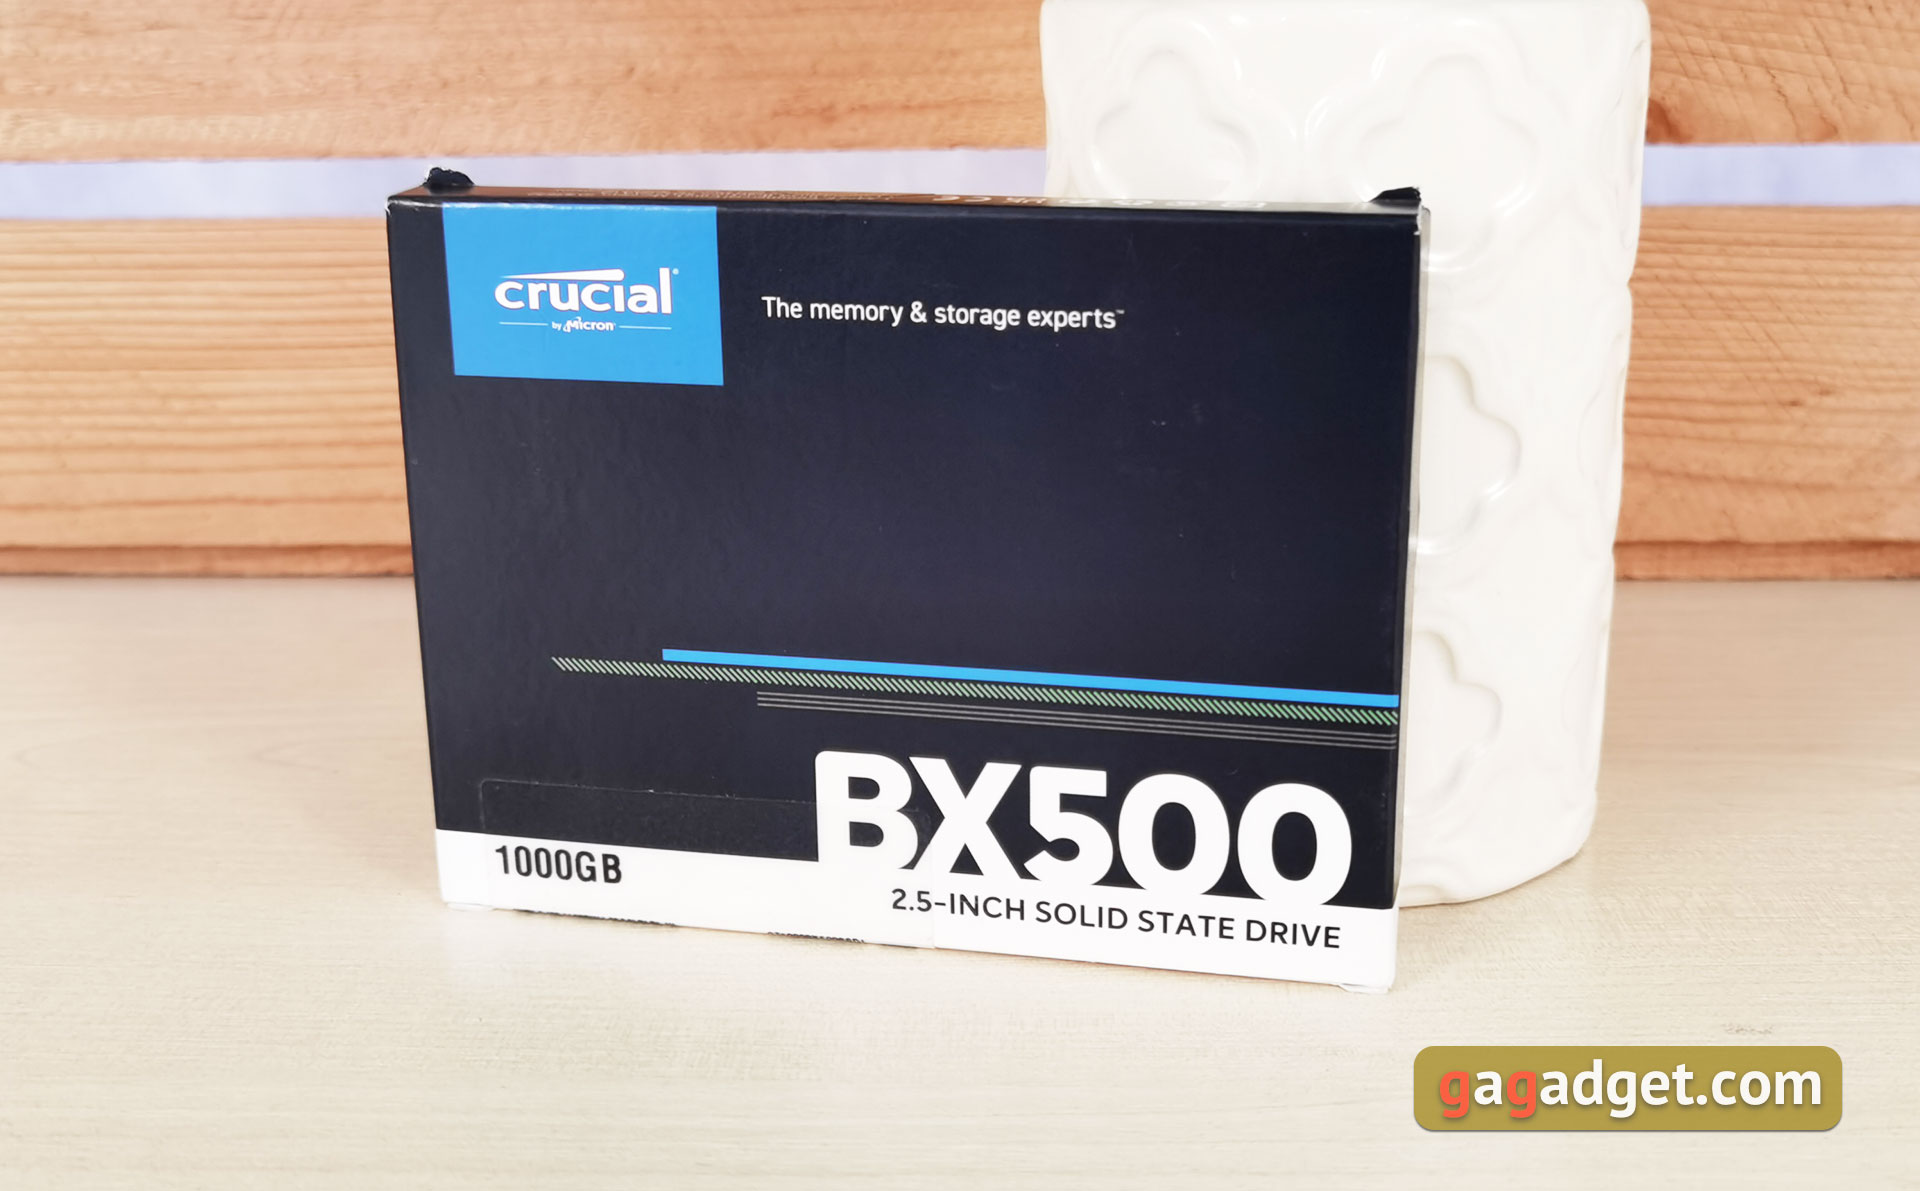 Crucial BX500 480 GB SSD review